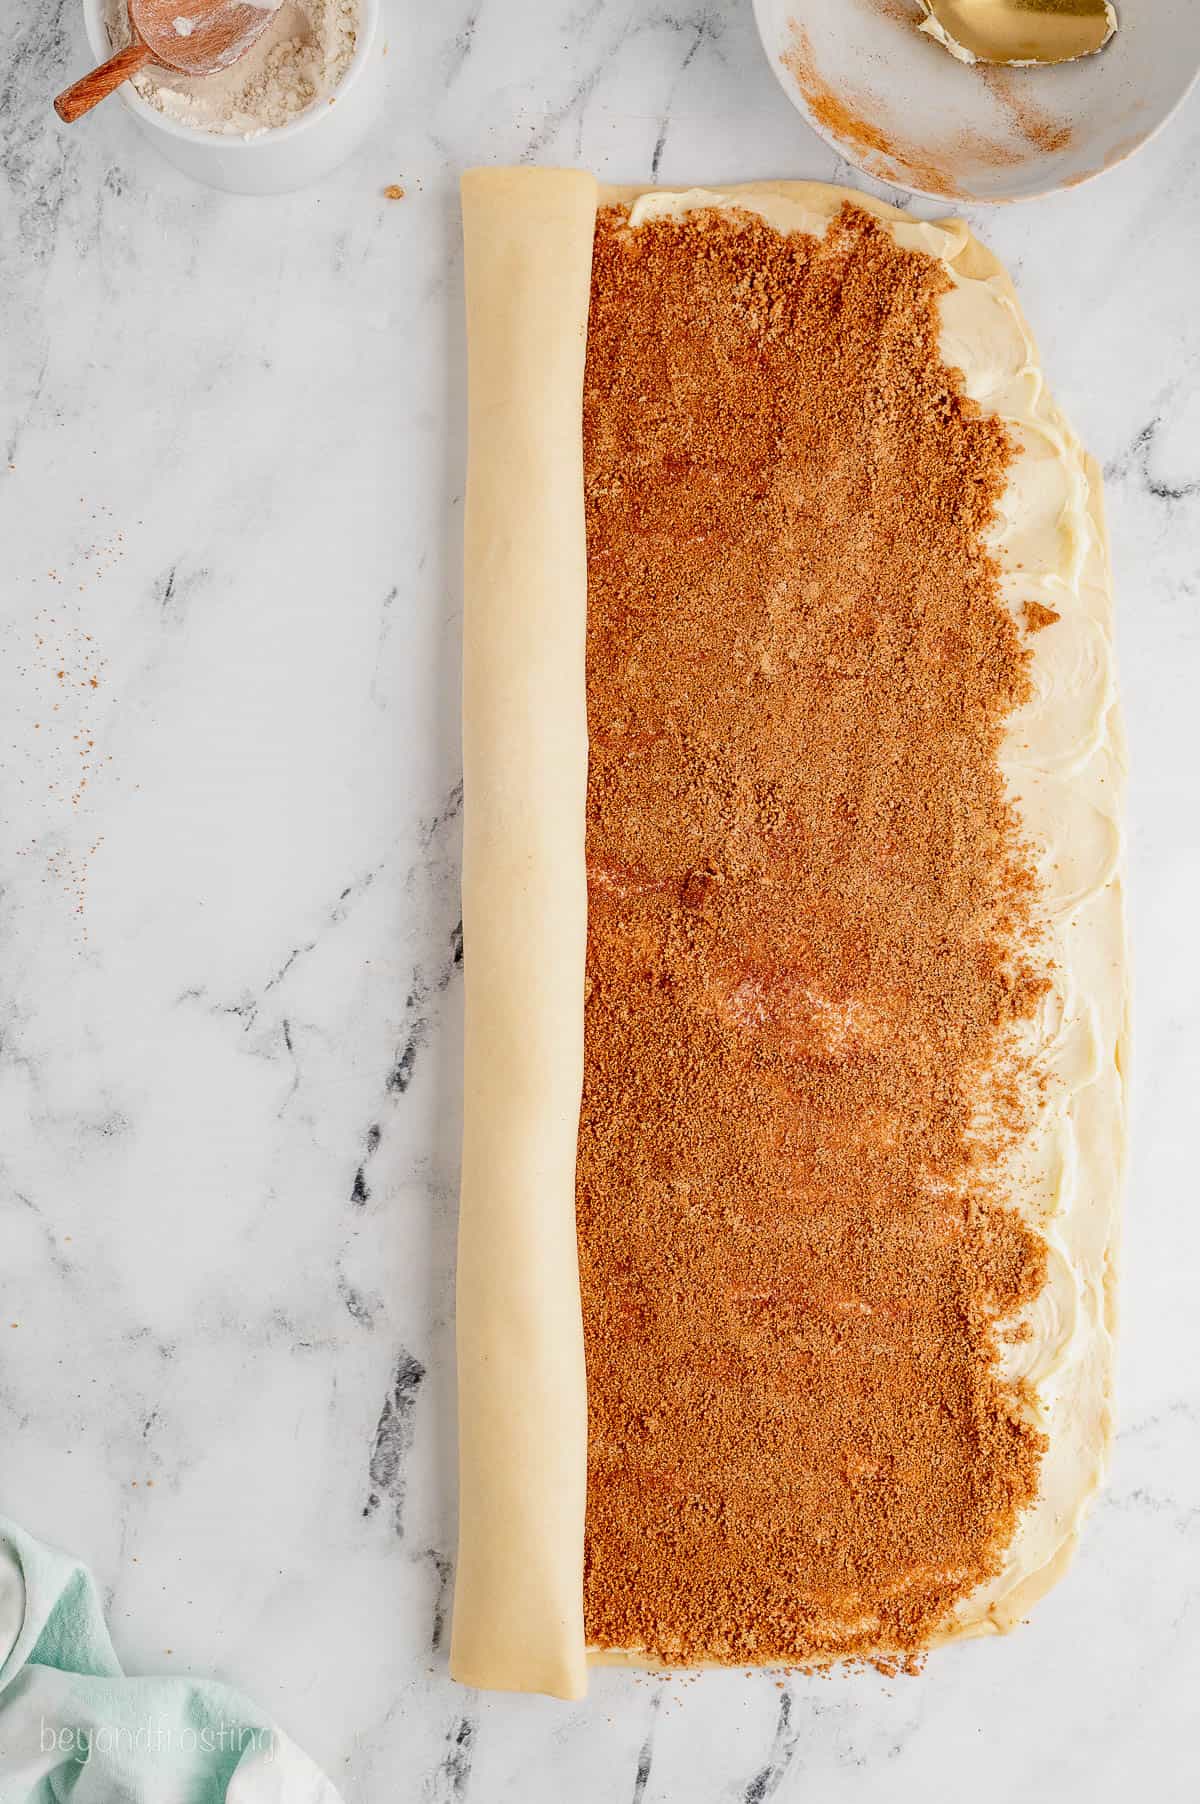 Dough filled with cinnamon sugar is rolled up lengthwise into a log.